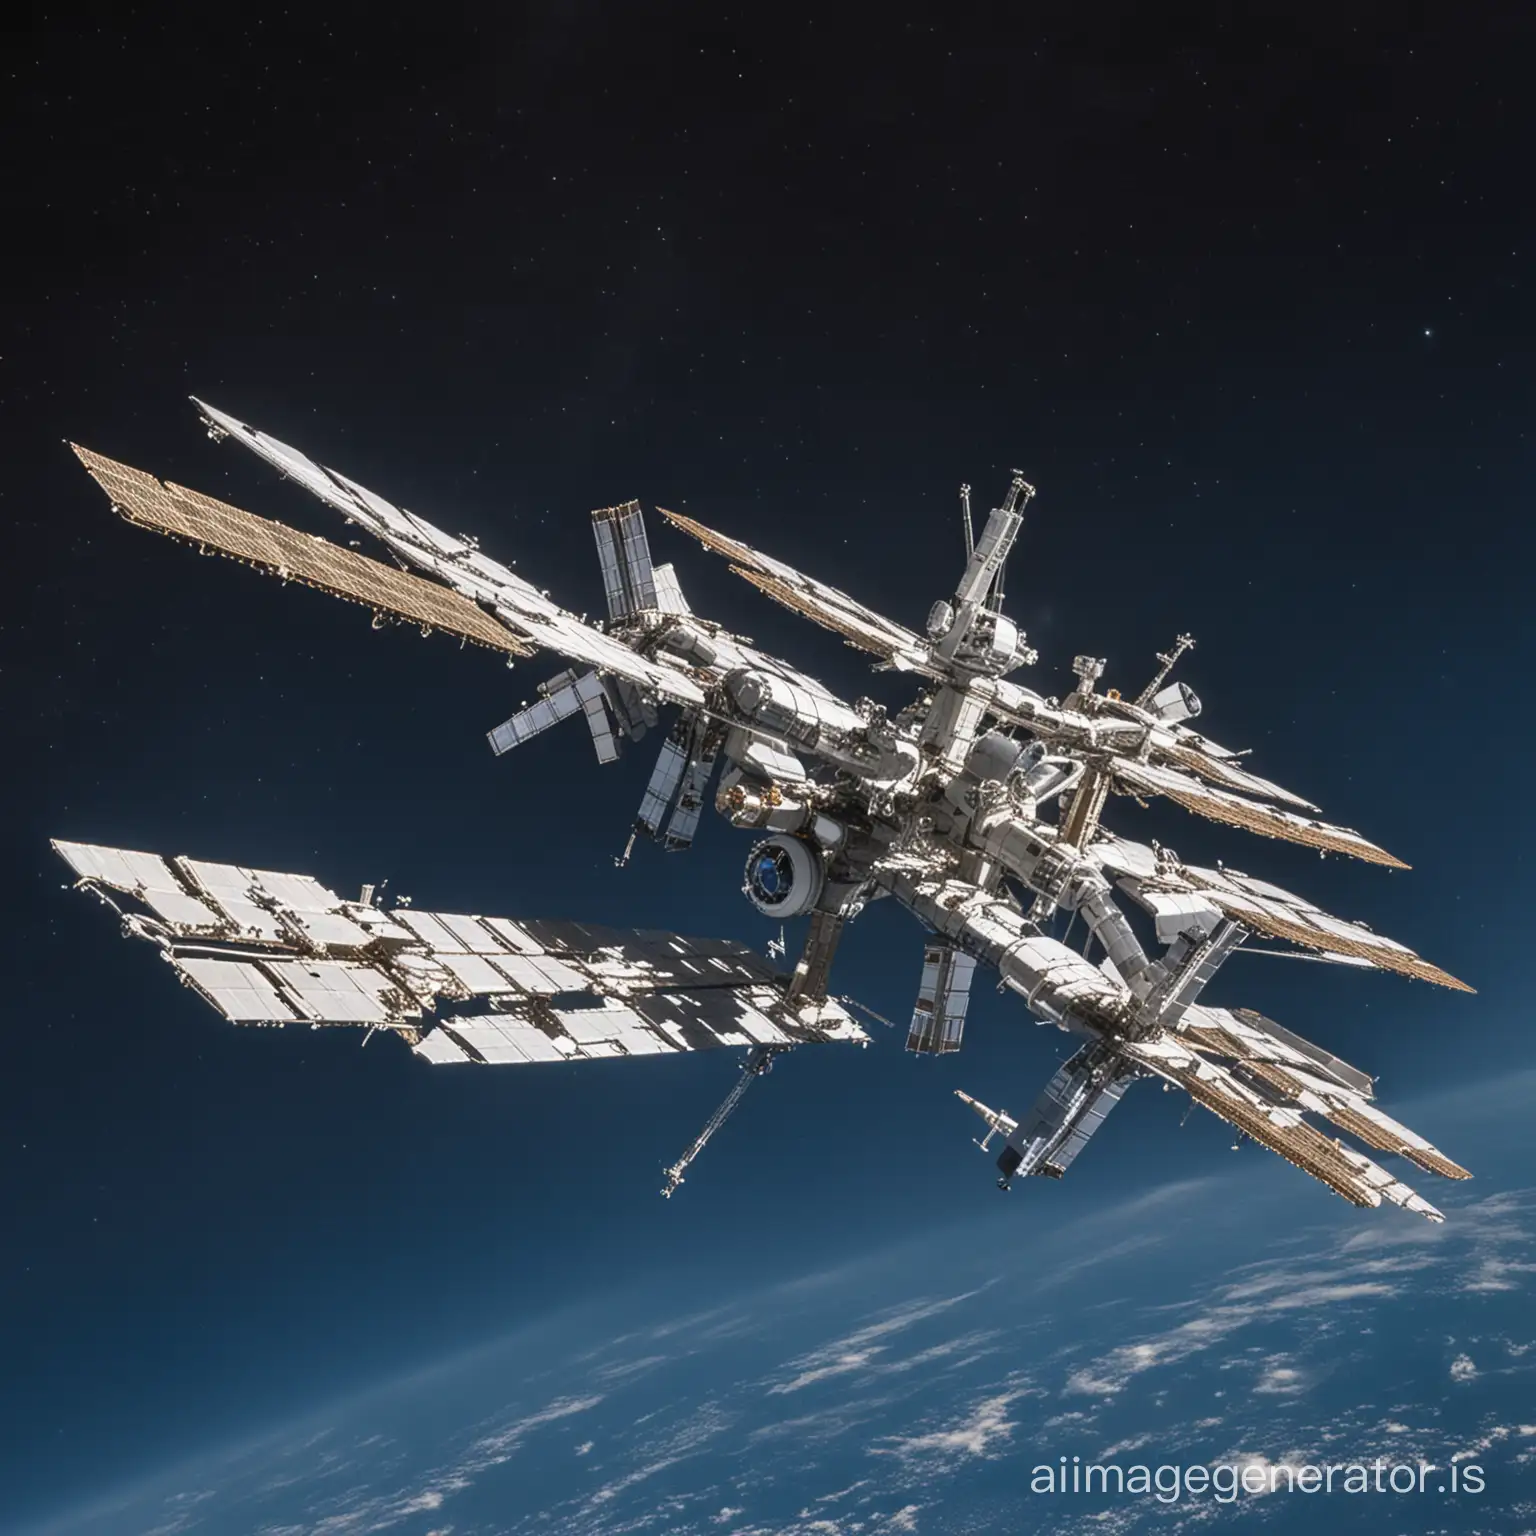 International-Space-Station-Orbiting-Earth-in-Space